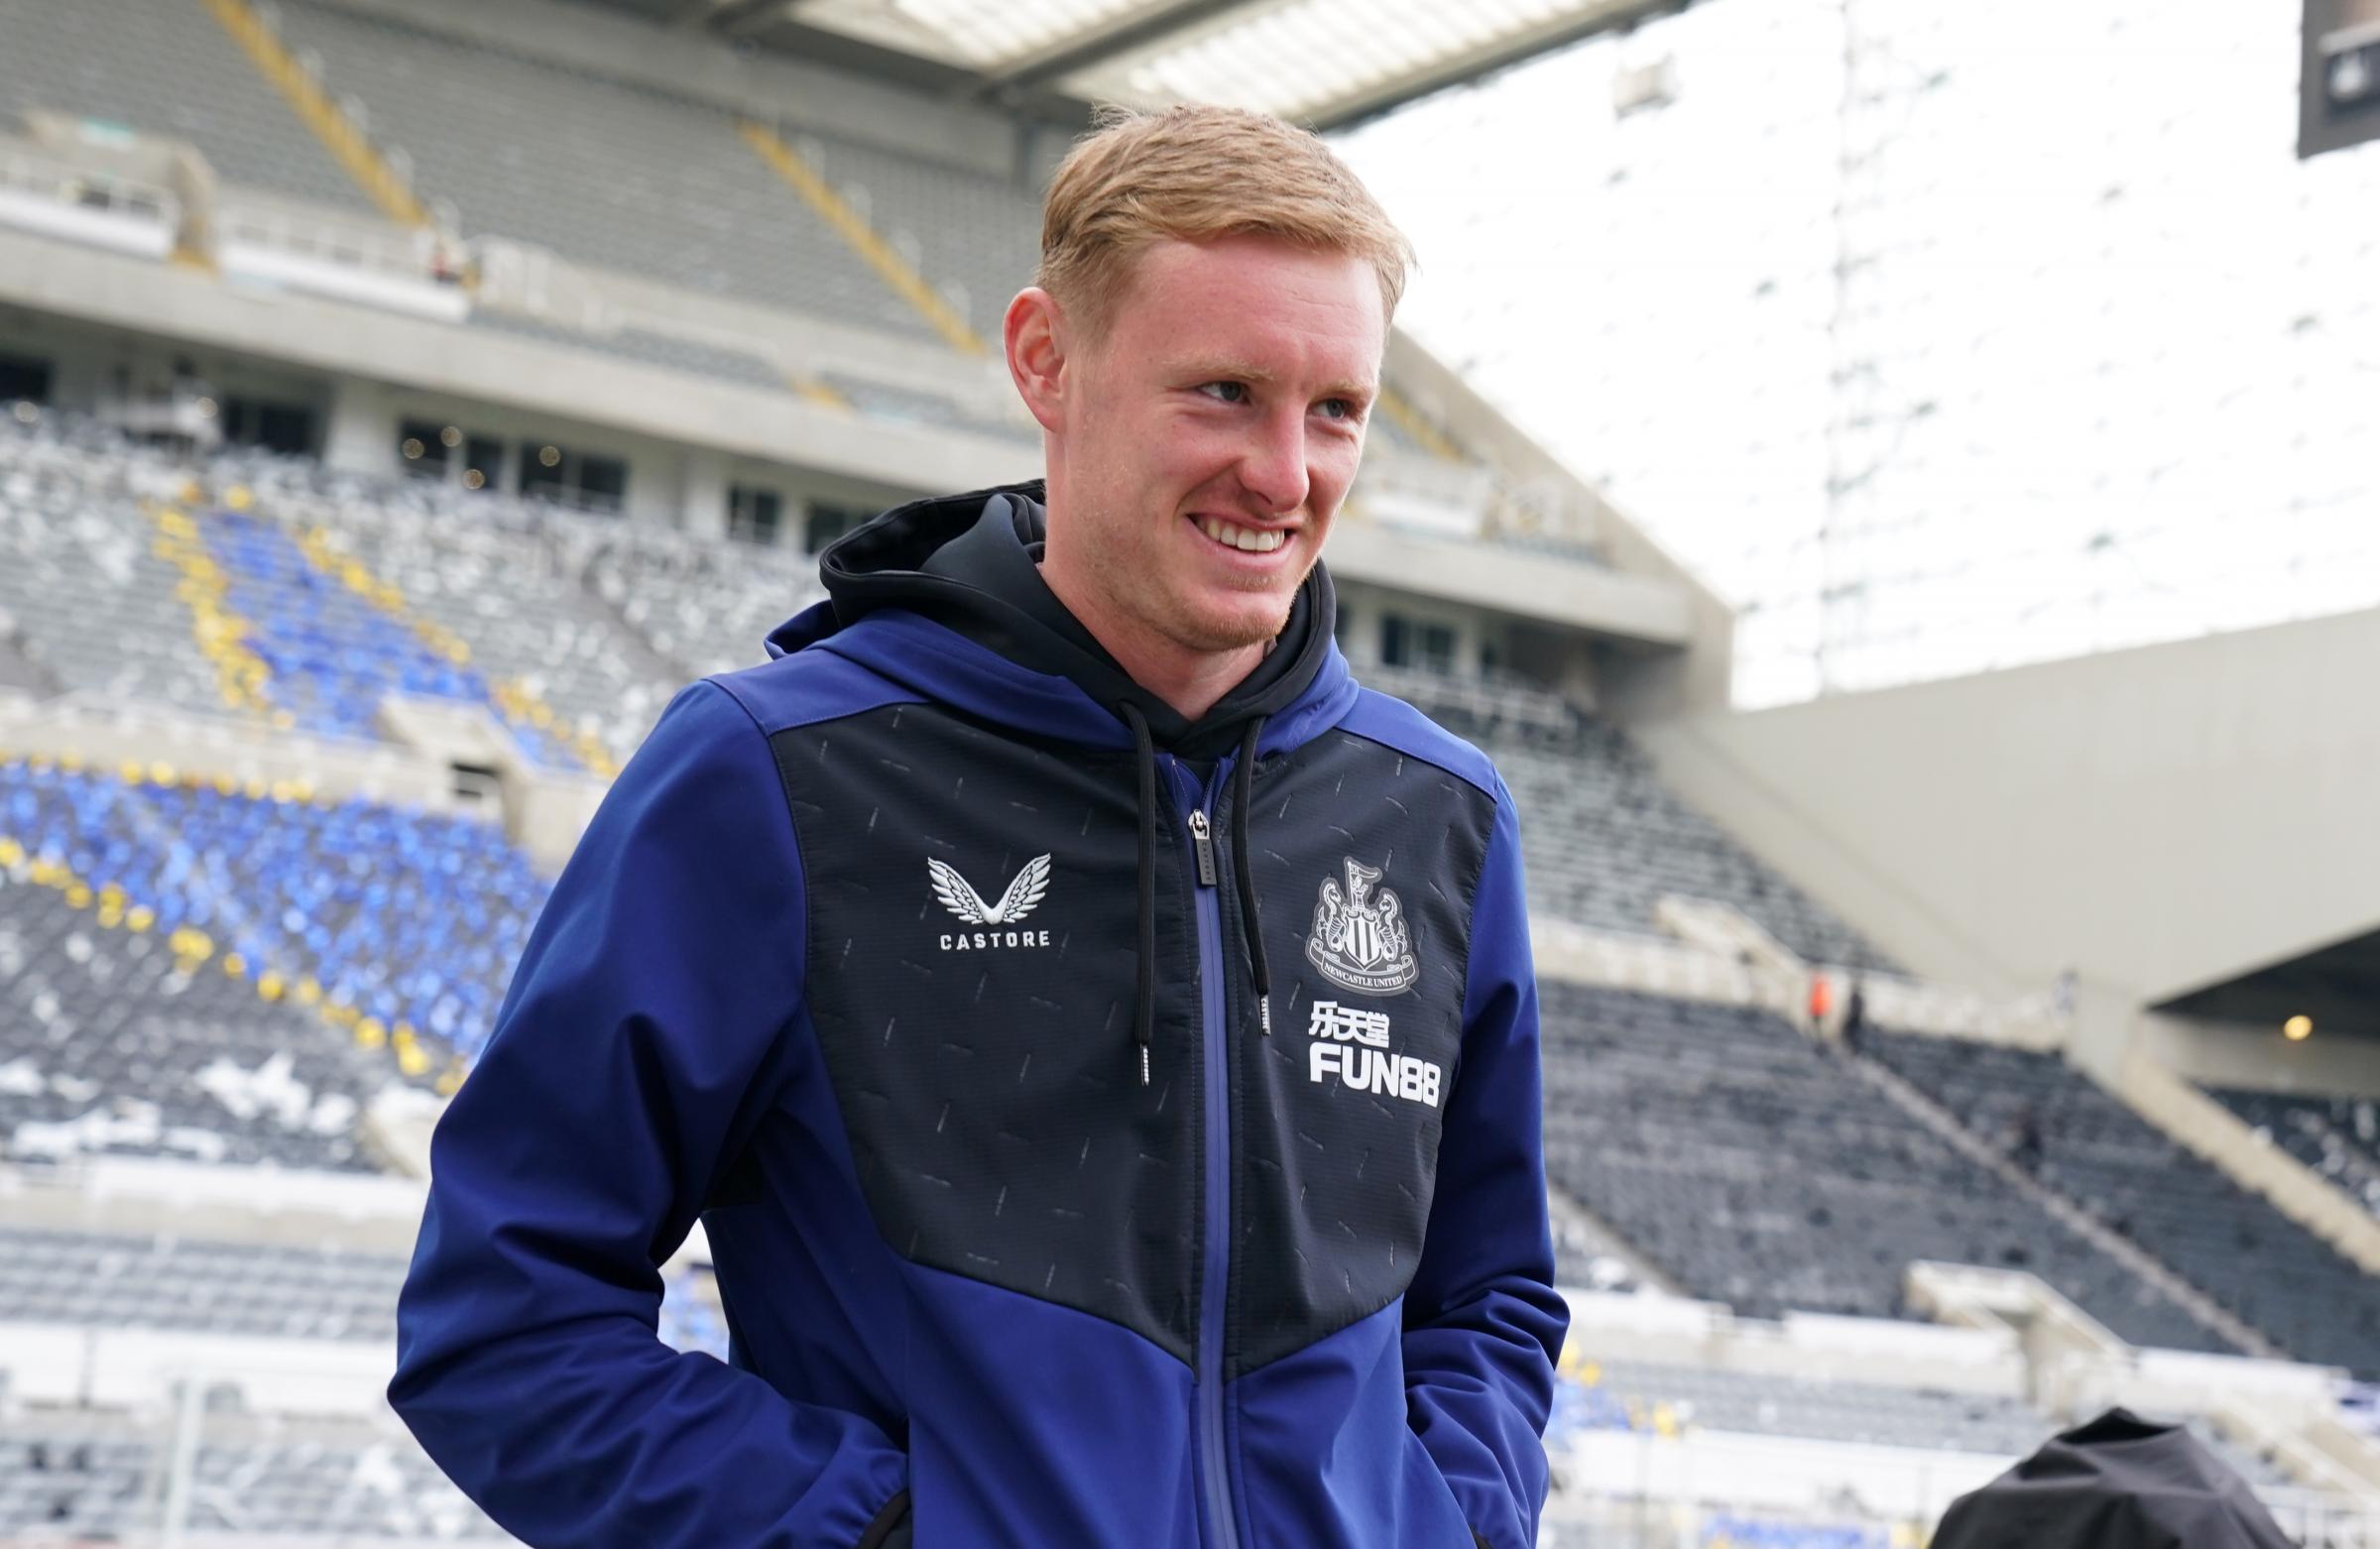 Sean Longstaff reacts to Newcastle United's place in Champions League